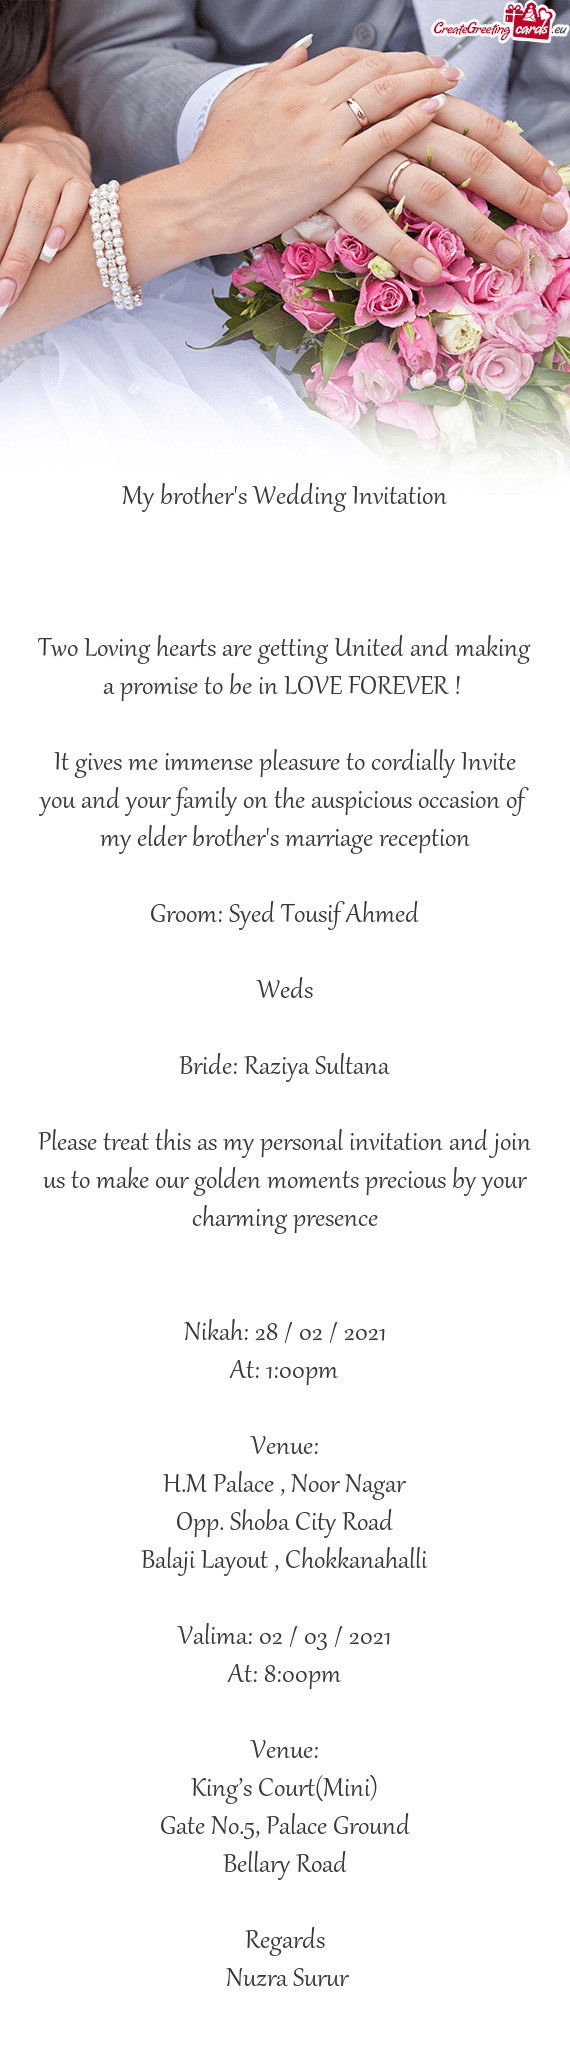 Groom: Syed Tousif Ahmed